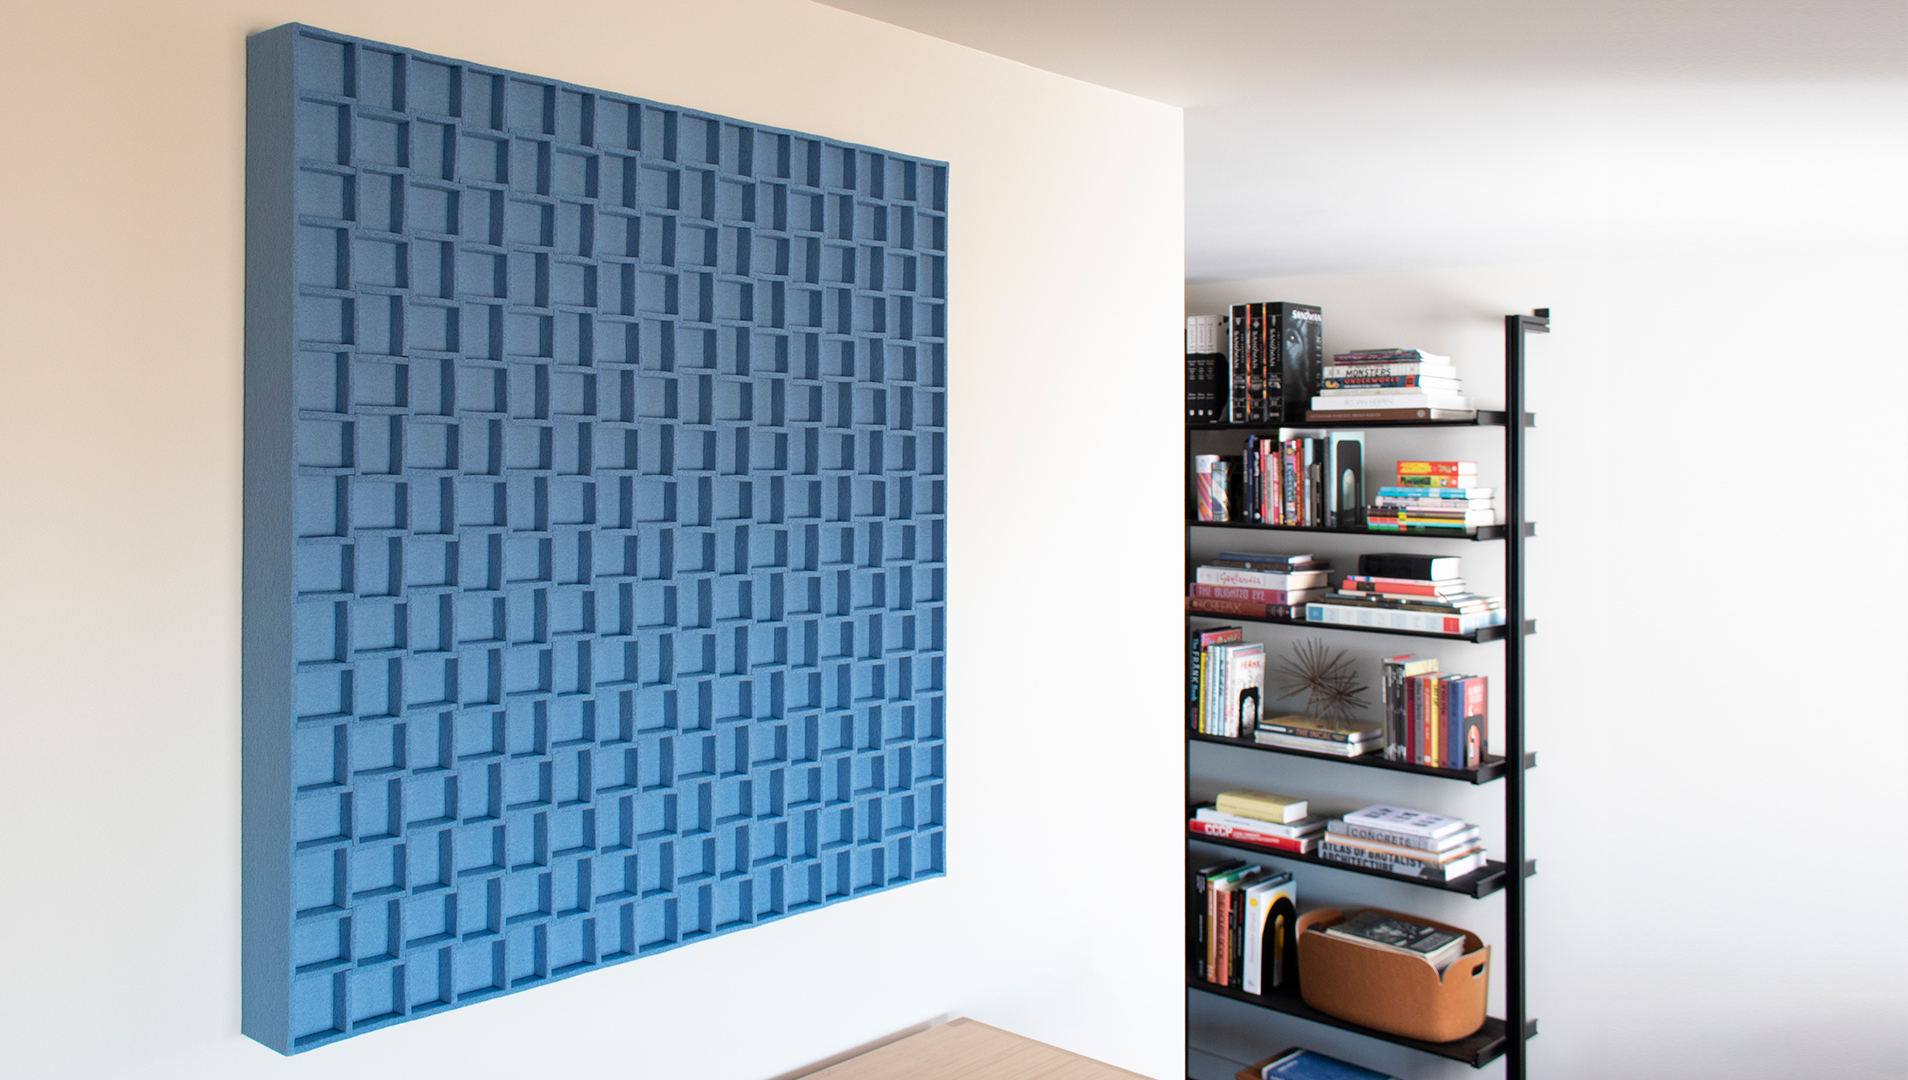 Submaterial Odessa wall decor panel in sky blue hangs in a home library